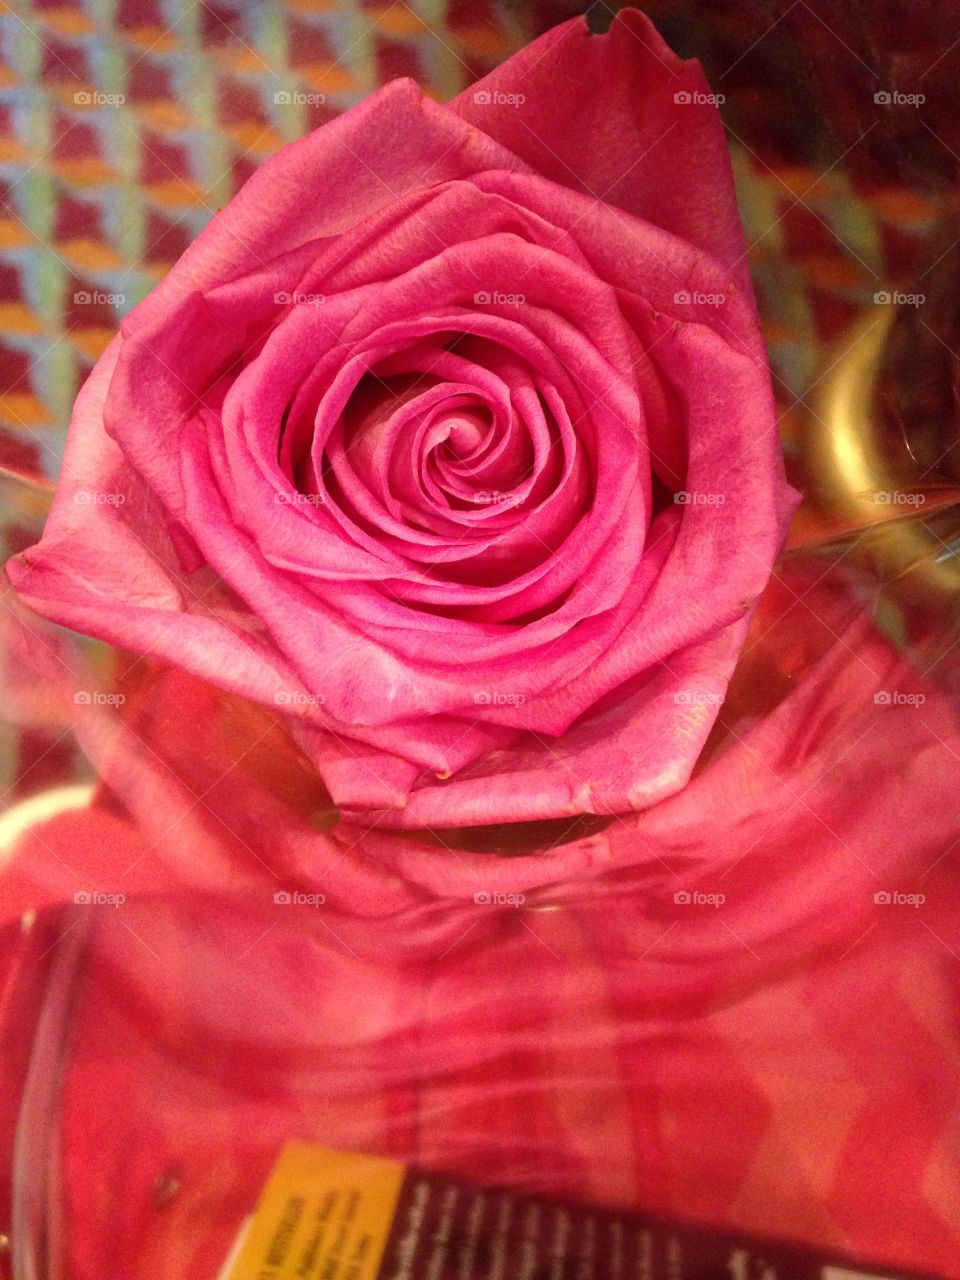 Close up of pink rose. Tight form of rose petals are shown in the view from above photo.